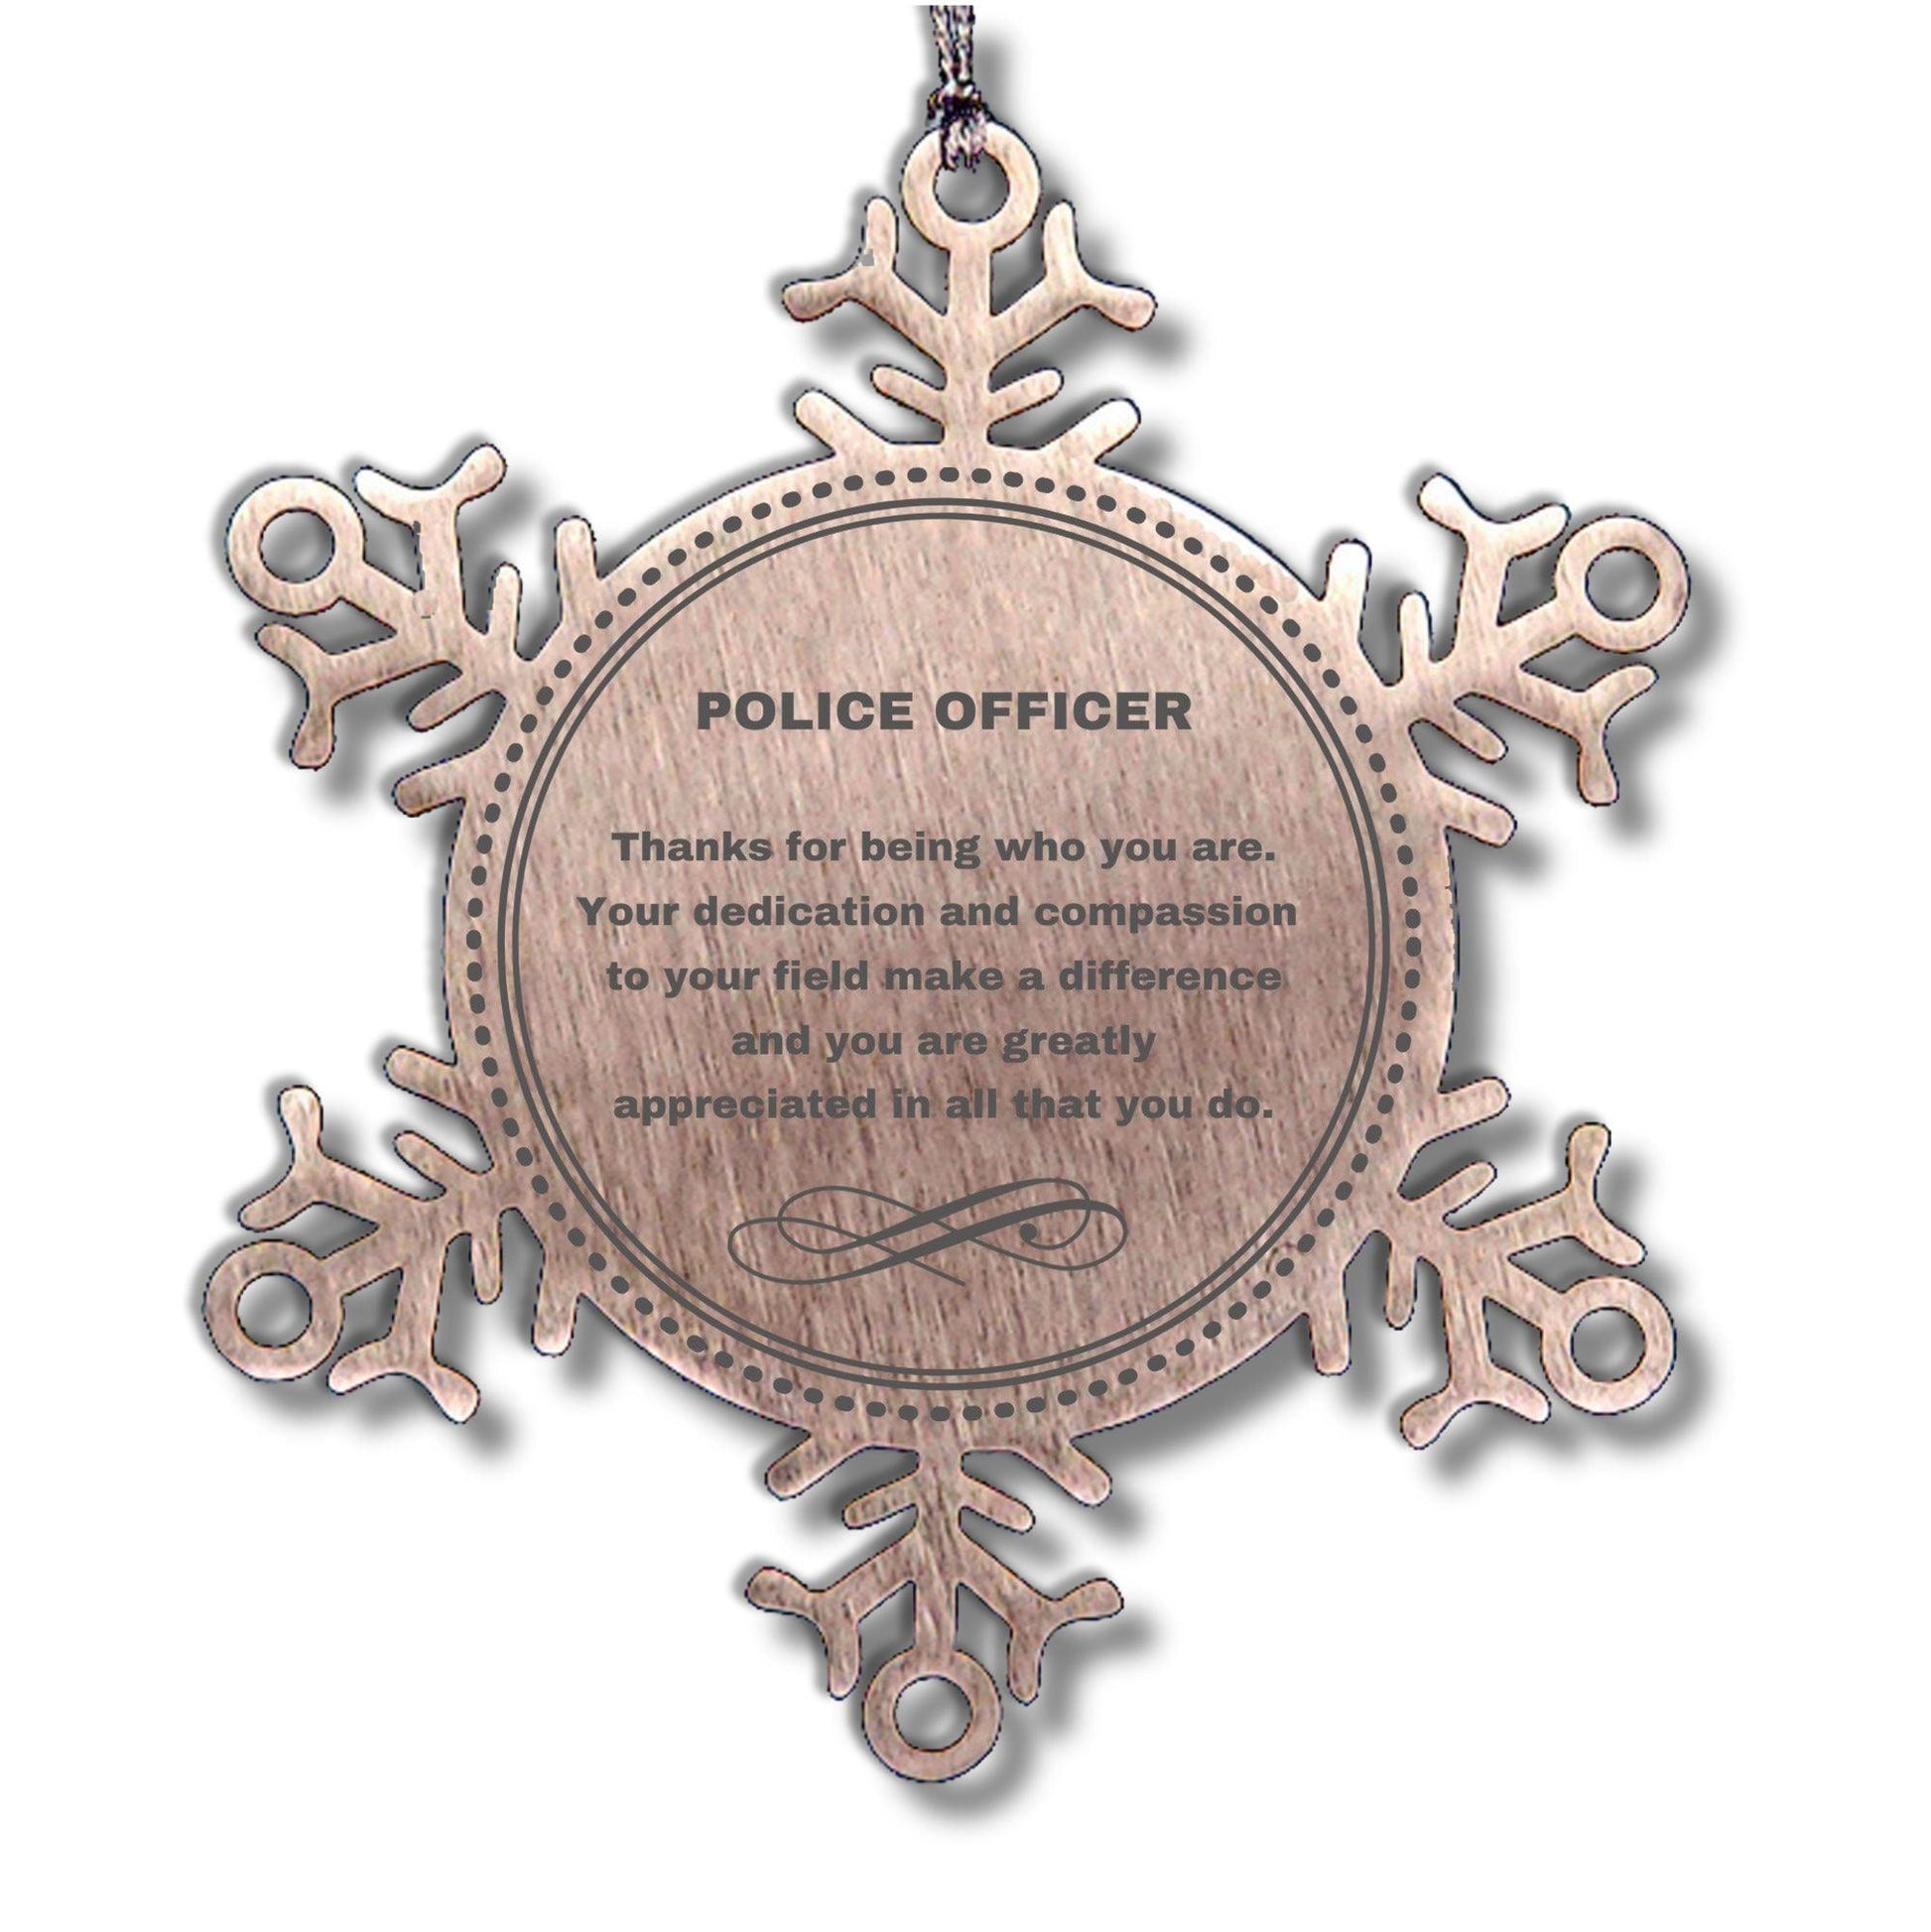 Police Officer Snowflake Ornament - Thanks for being who you are - Birthday Christmas Jewelry Gifts Coworkers Colleague Boss - Mallard Moon Gift Shop